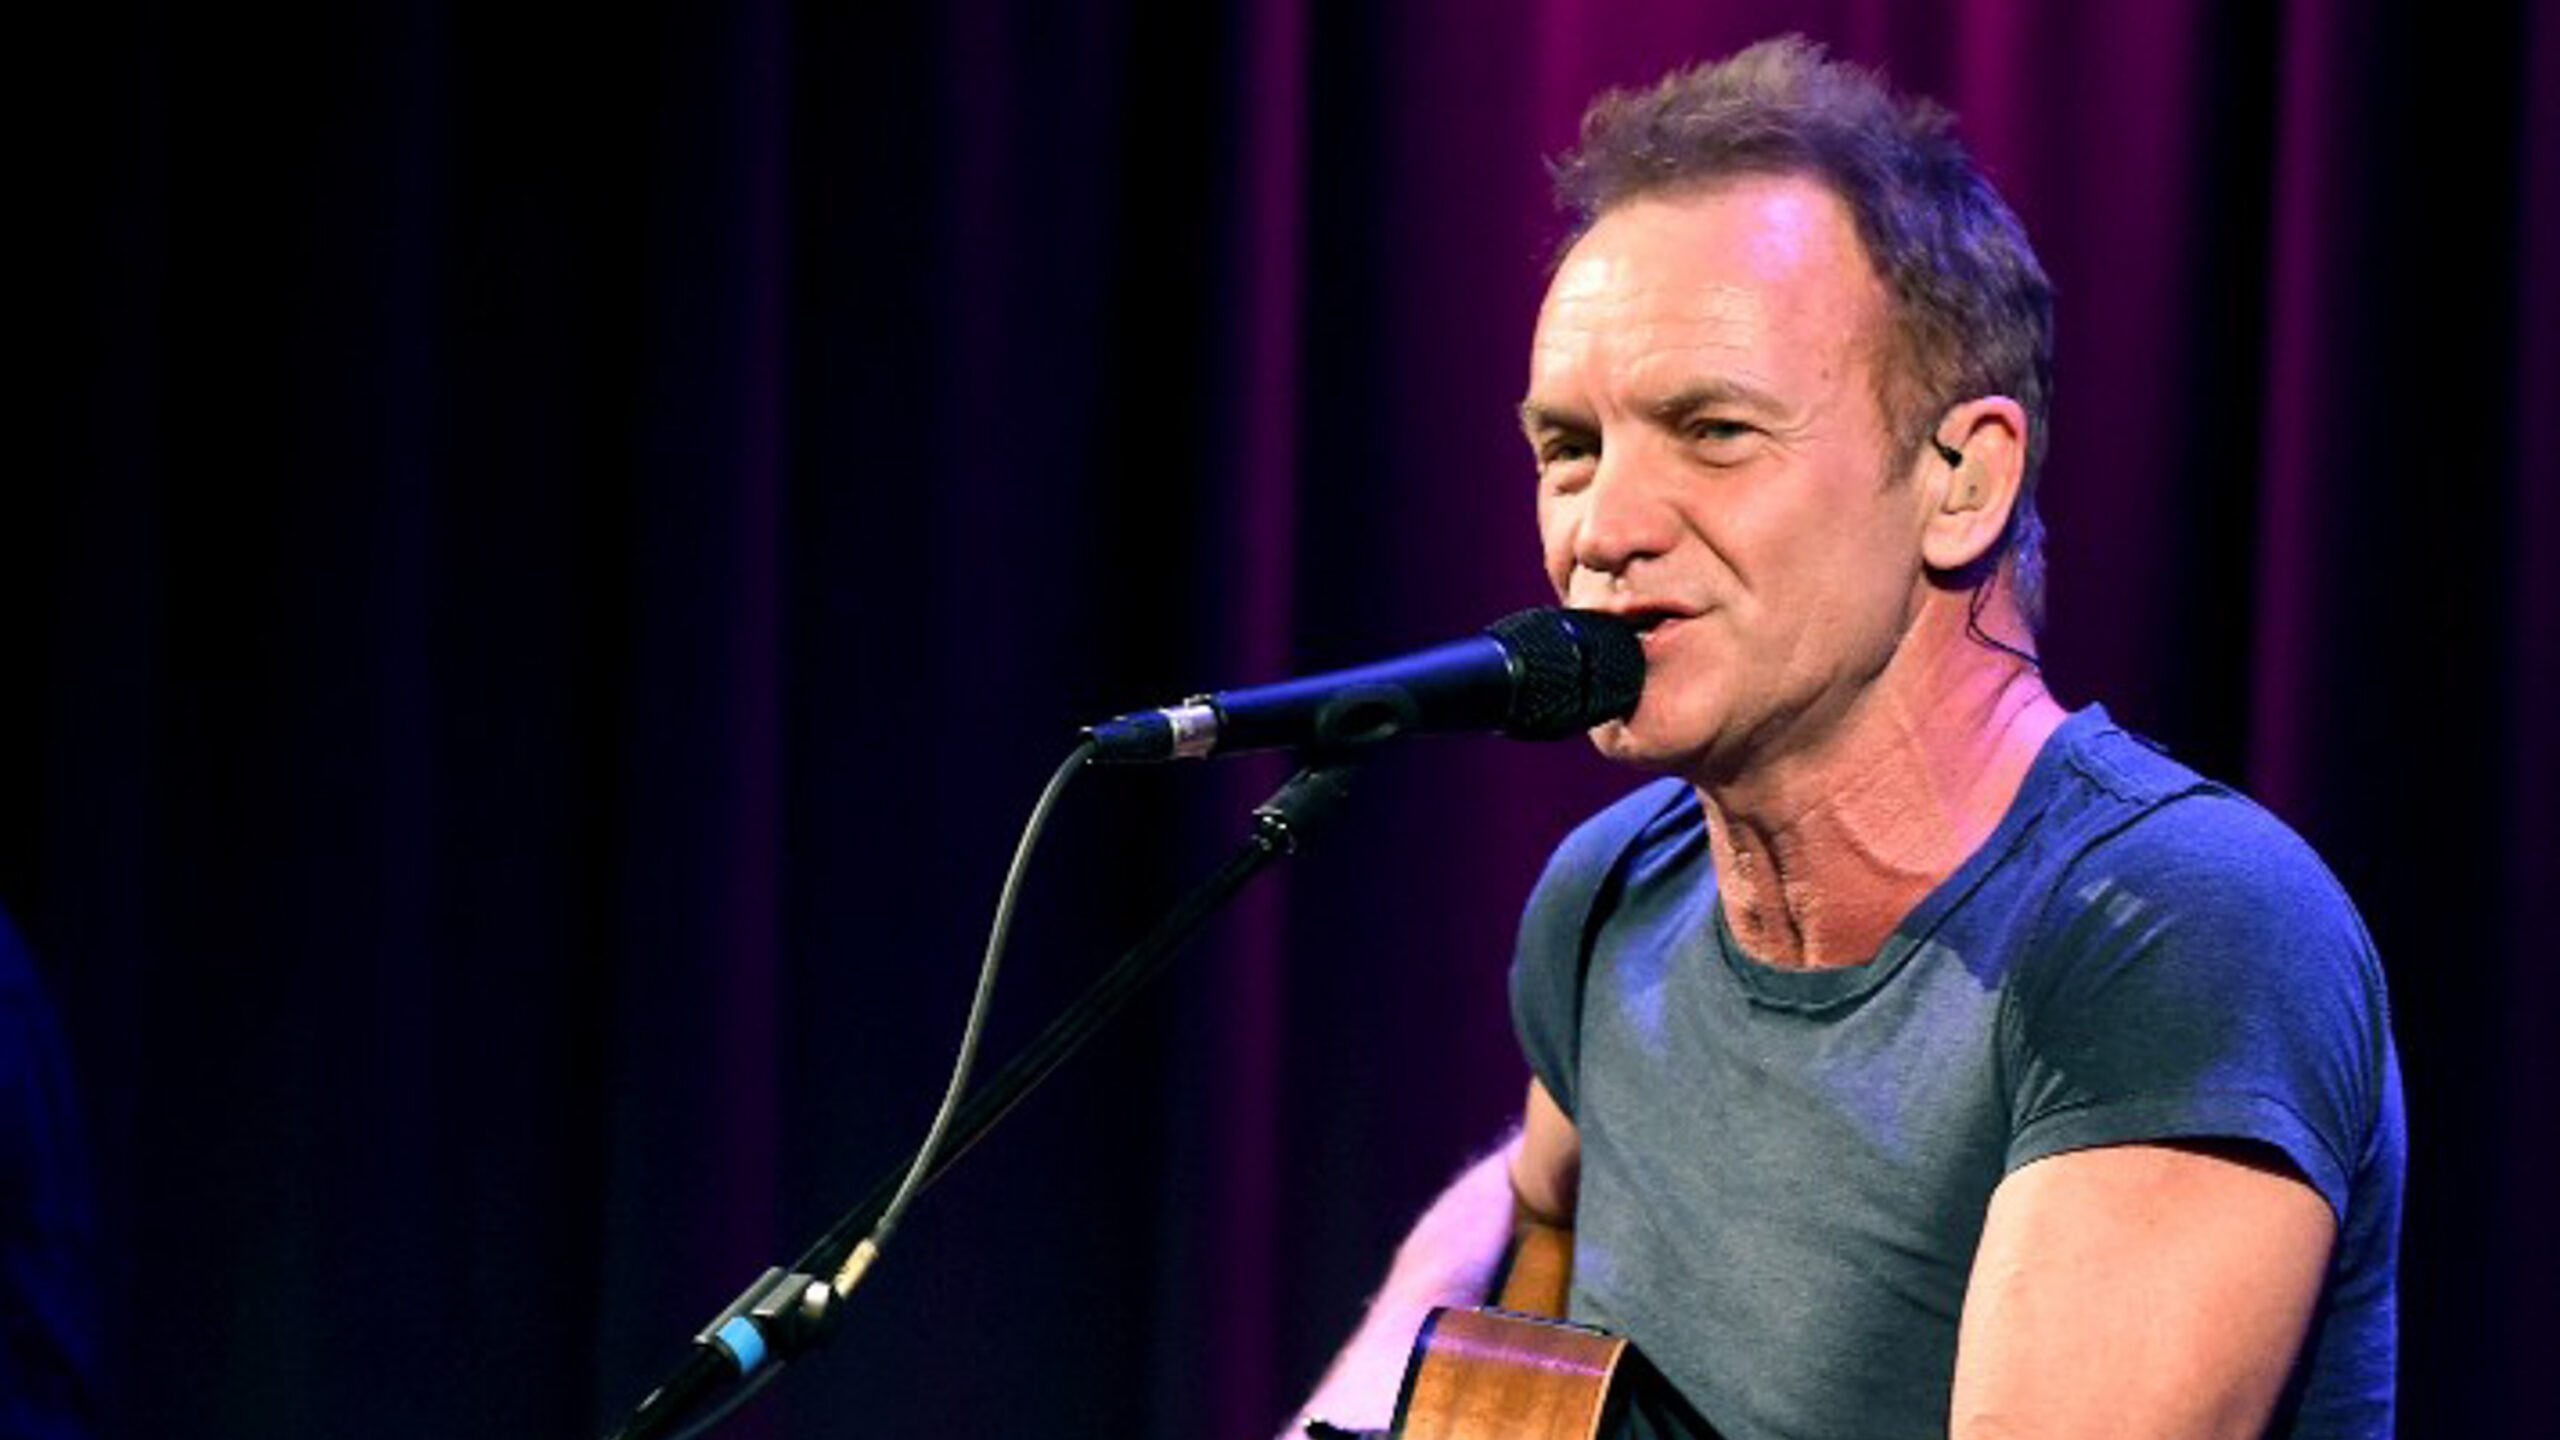 Paris’ Bataclan to reopen with Sting gig, day before attack anniversary – owner